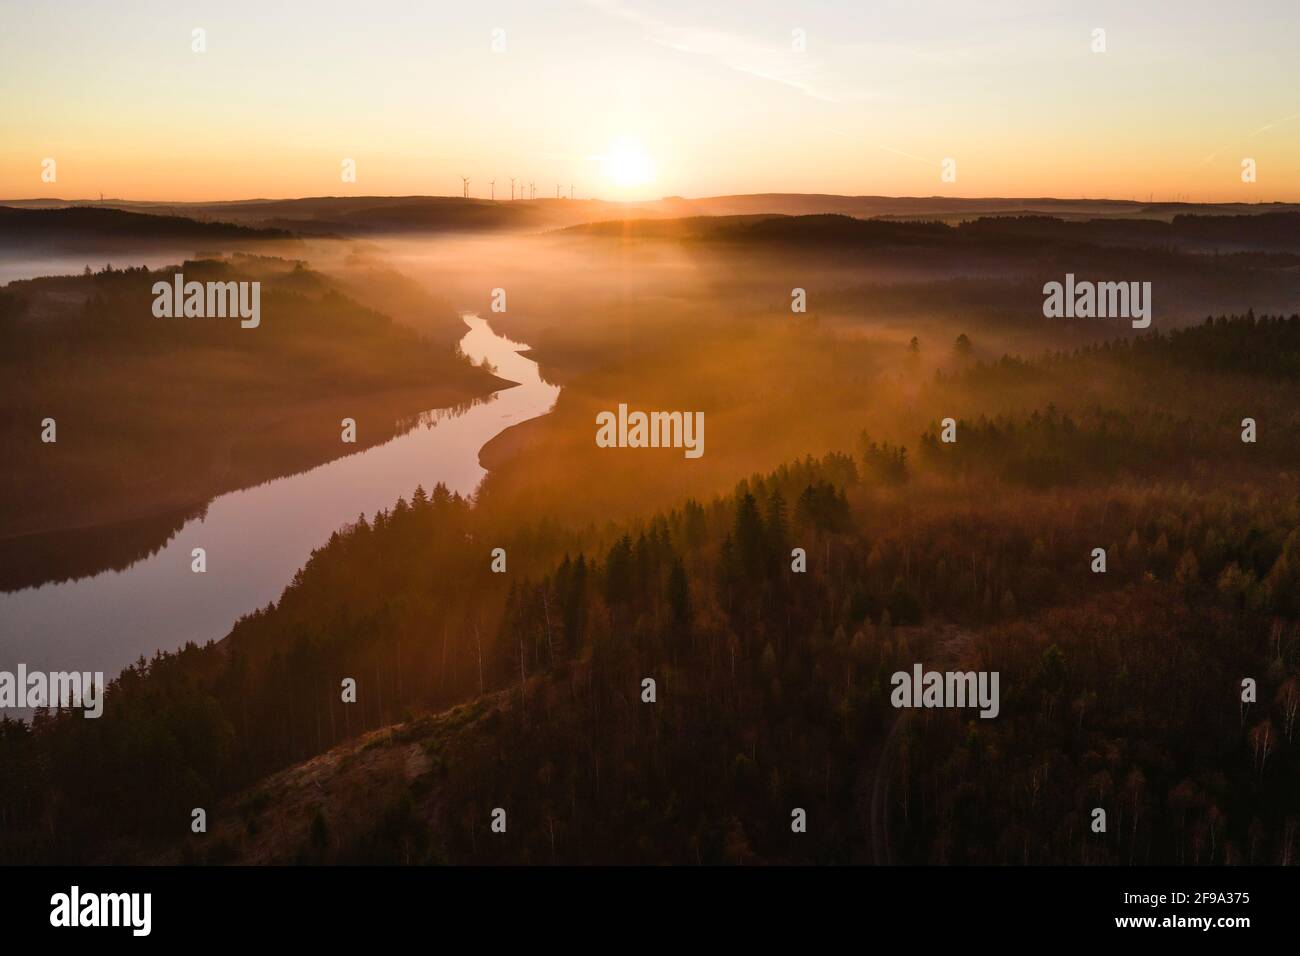 A single arm of the Bleilochtalsperre meanders through the forest in the direction of the rising sun Stock Photo